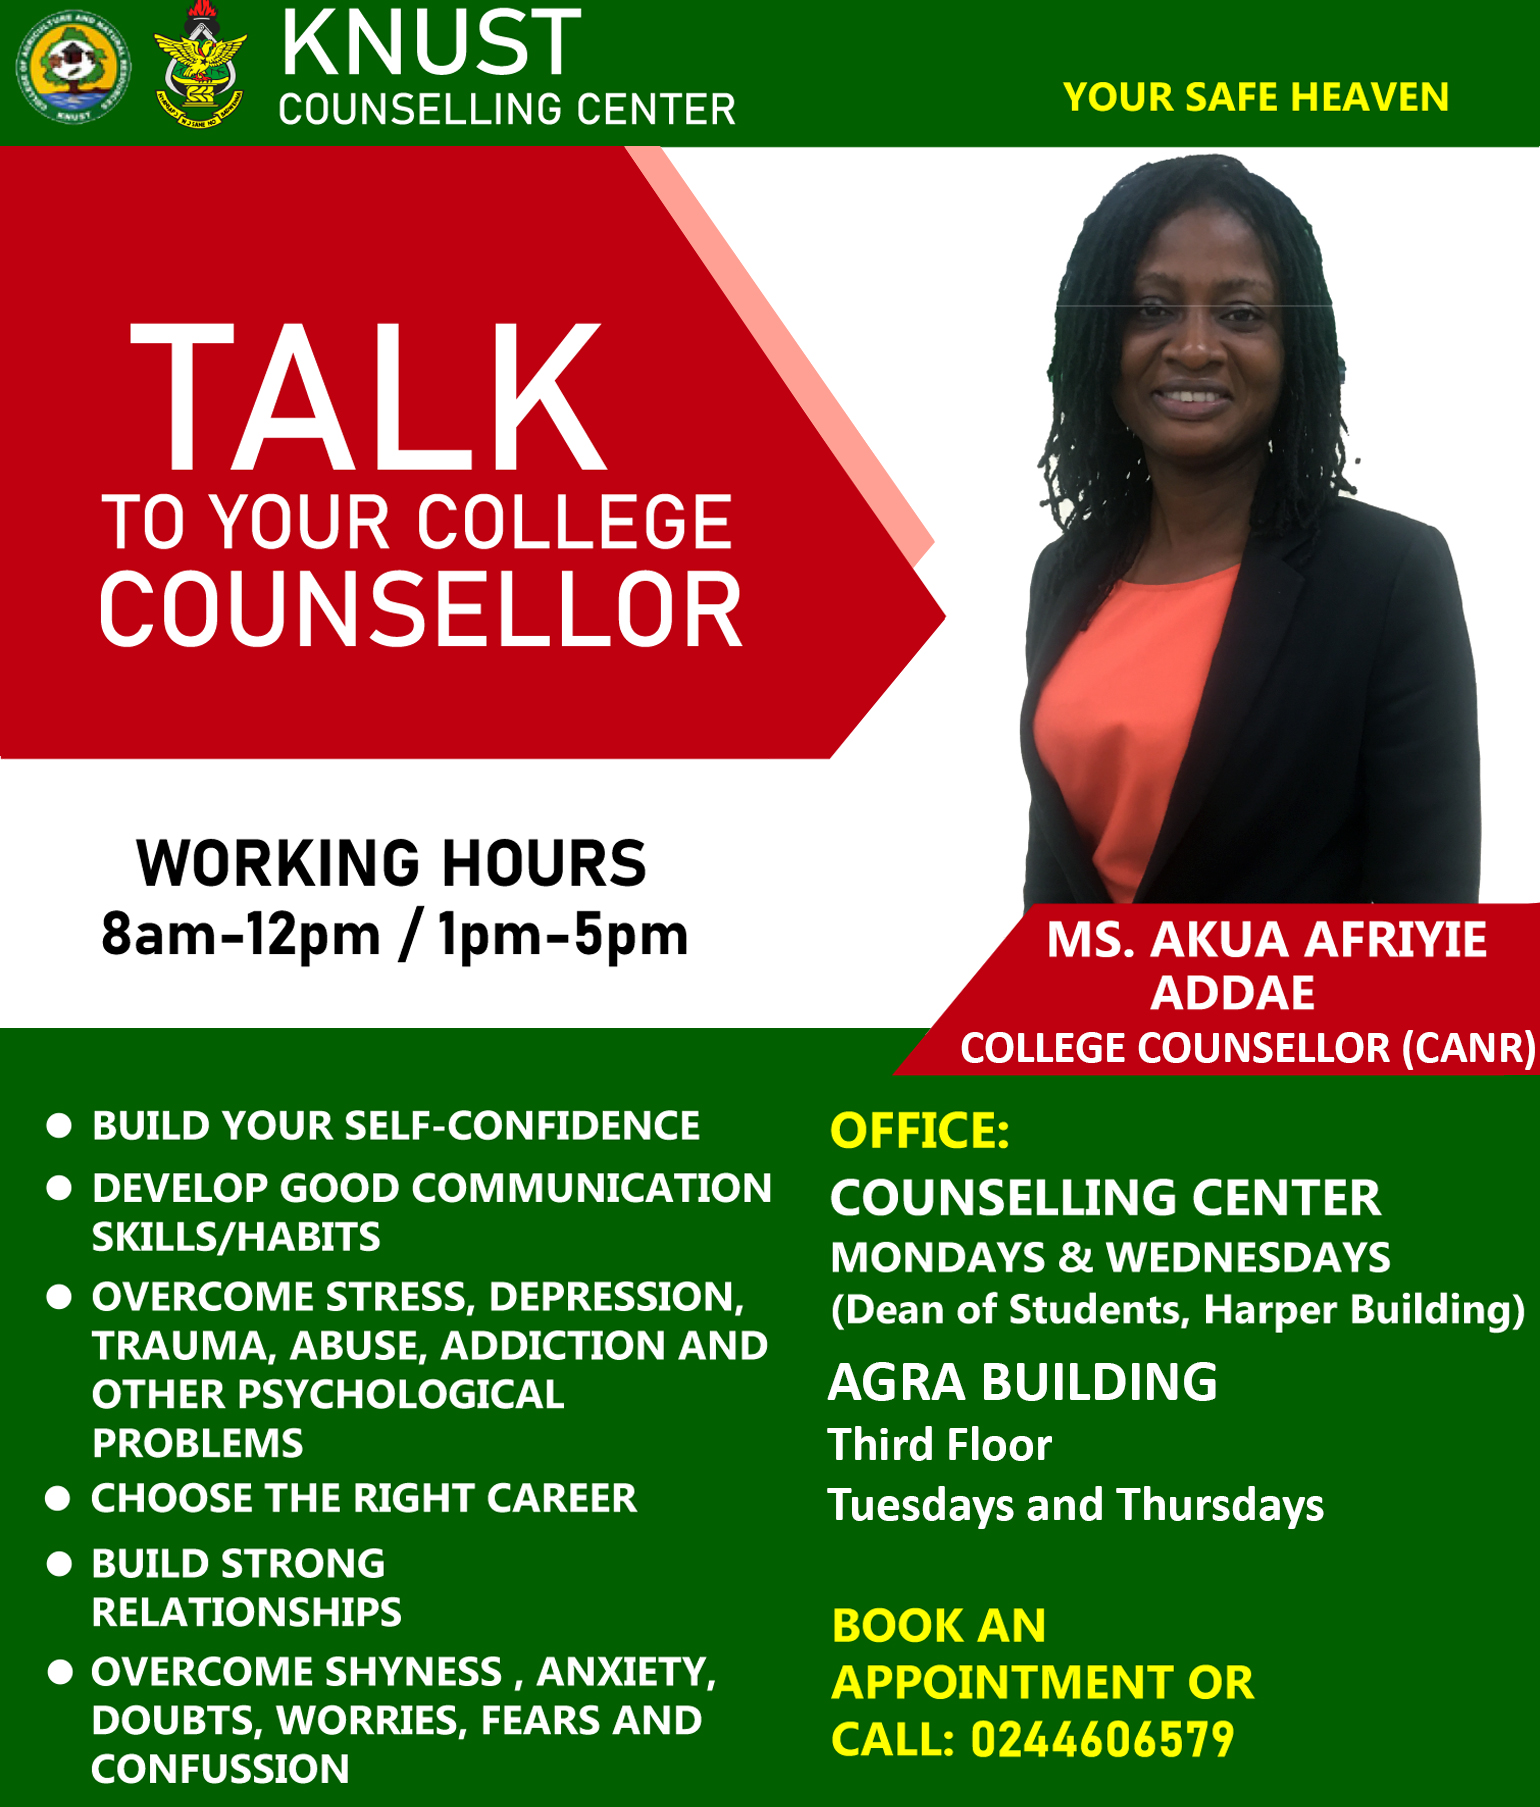 KNUST Counseling Center